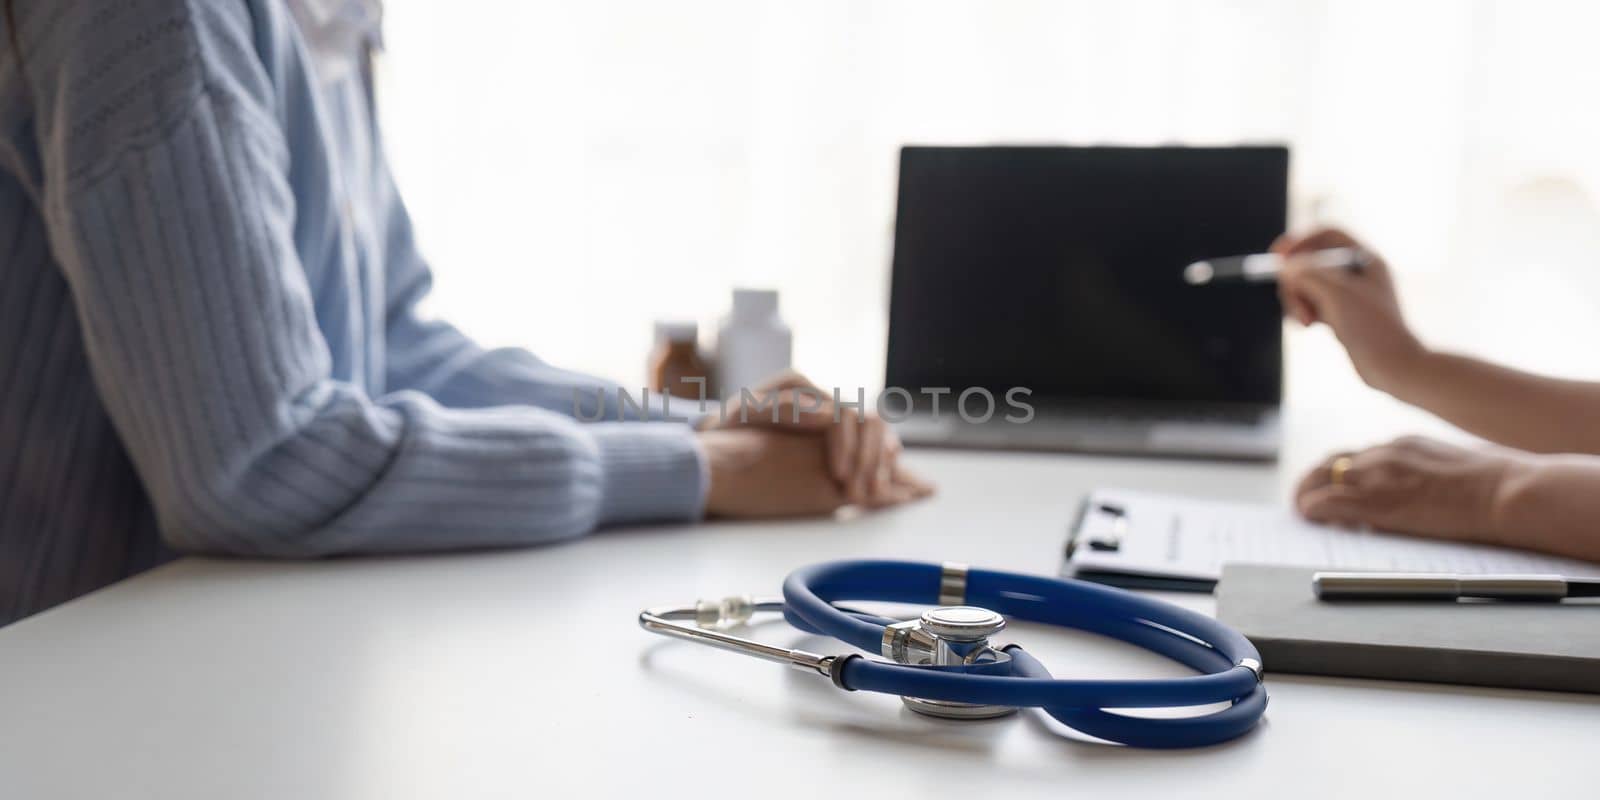 medical consultation - doctor talking to patient in clinic office. focus on stethoscope